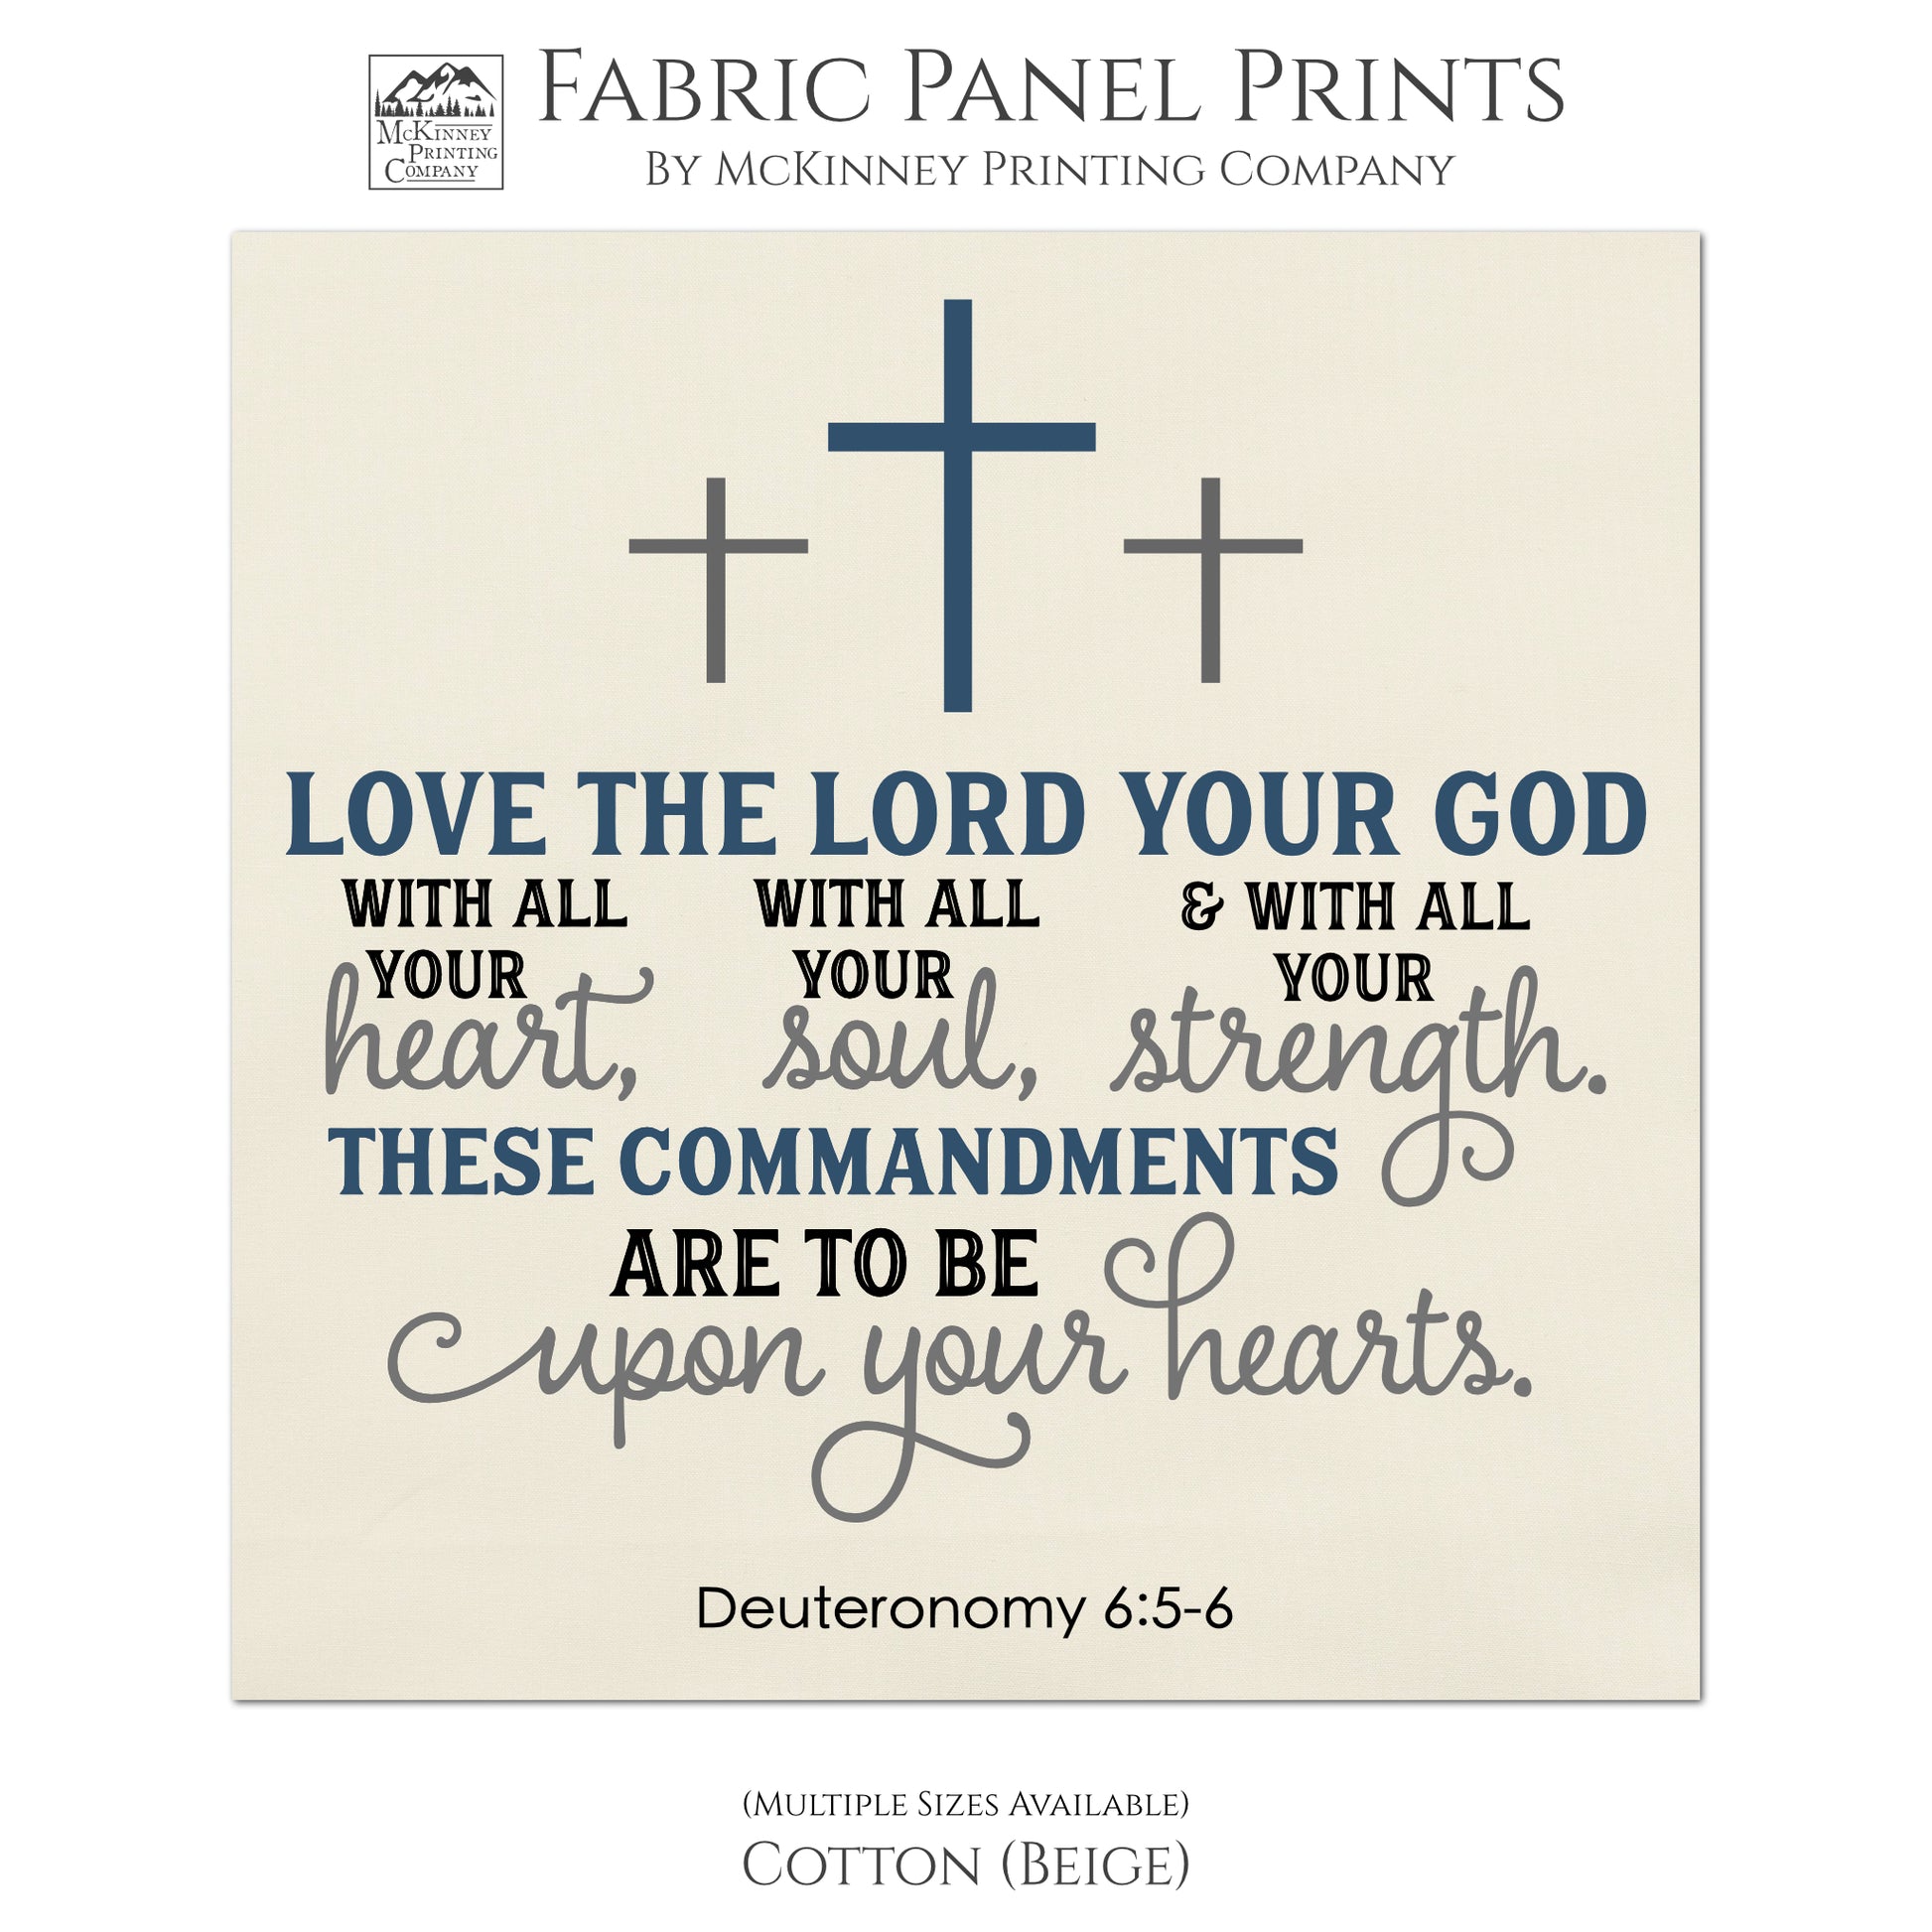 Deuteronomy 6:5 - 6, Love the Lord Your God, Scripture Fabric, Wall Art, Decor, Sewing, Materials, Craft - Kona Cotton